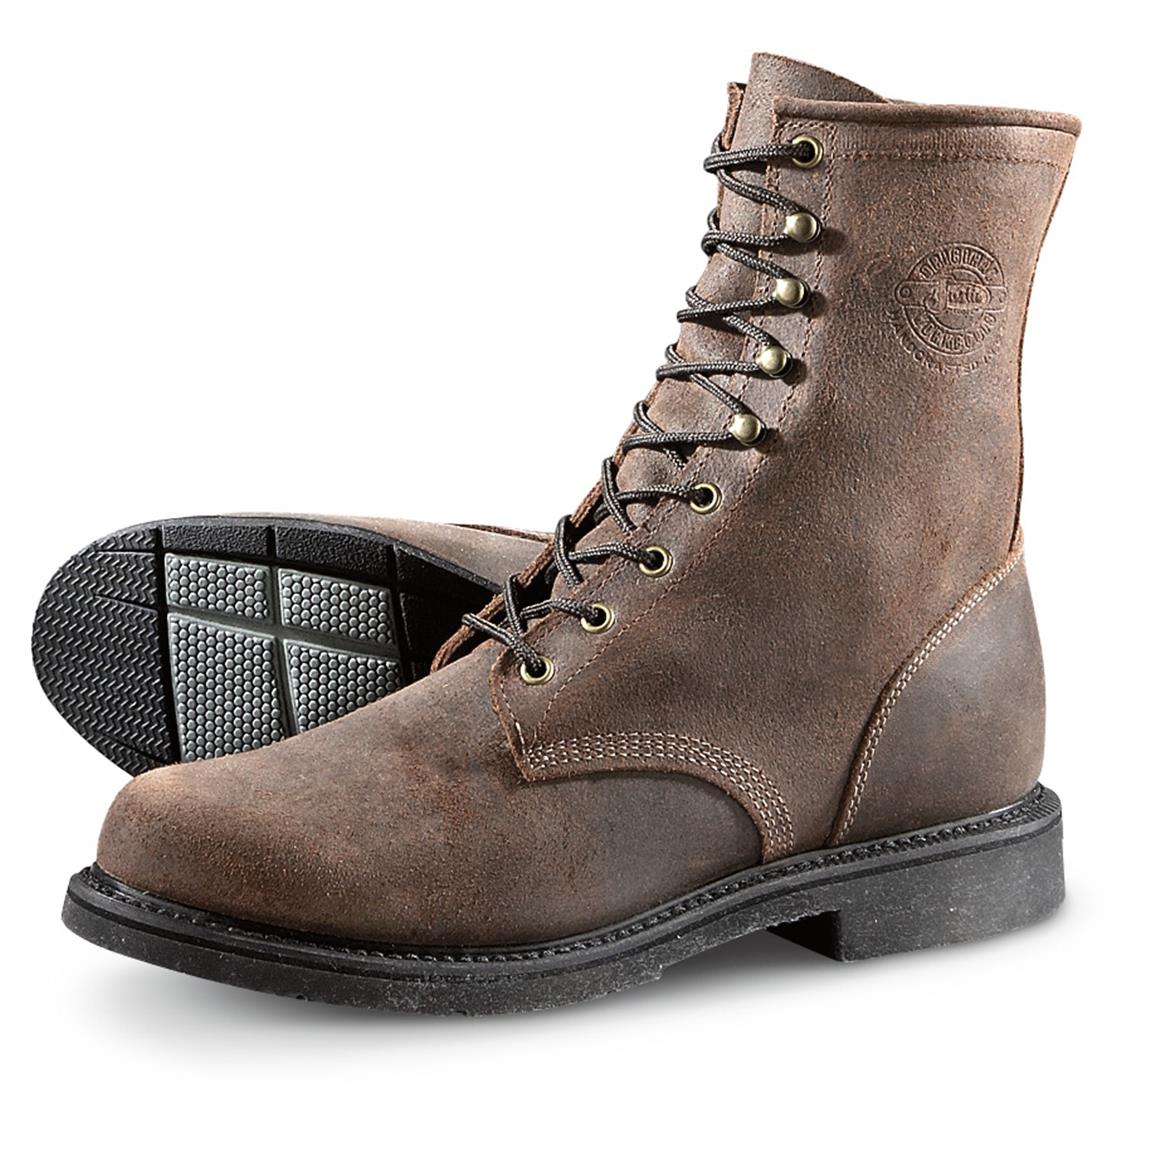 Justin Men's Dark Mountain Lace-up Work Boots - 640710, Work Boots at